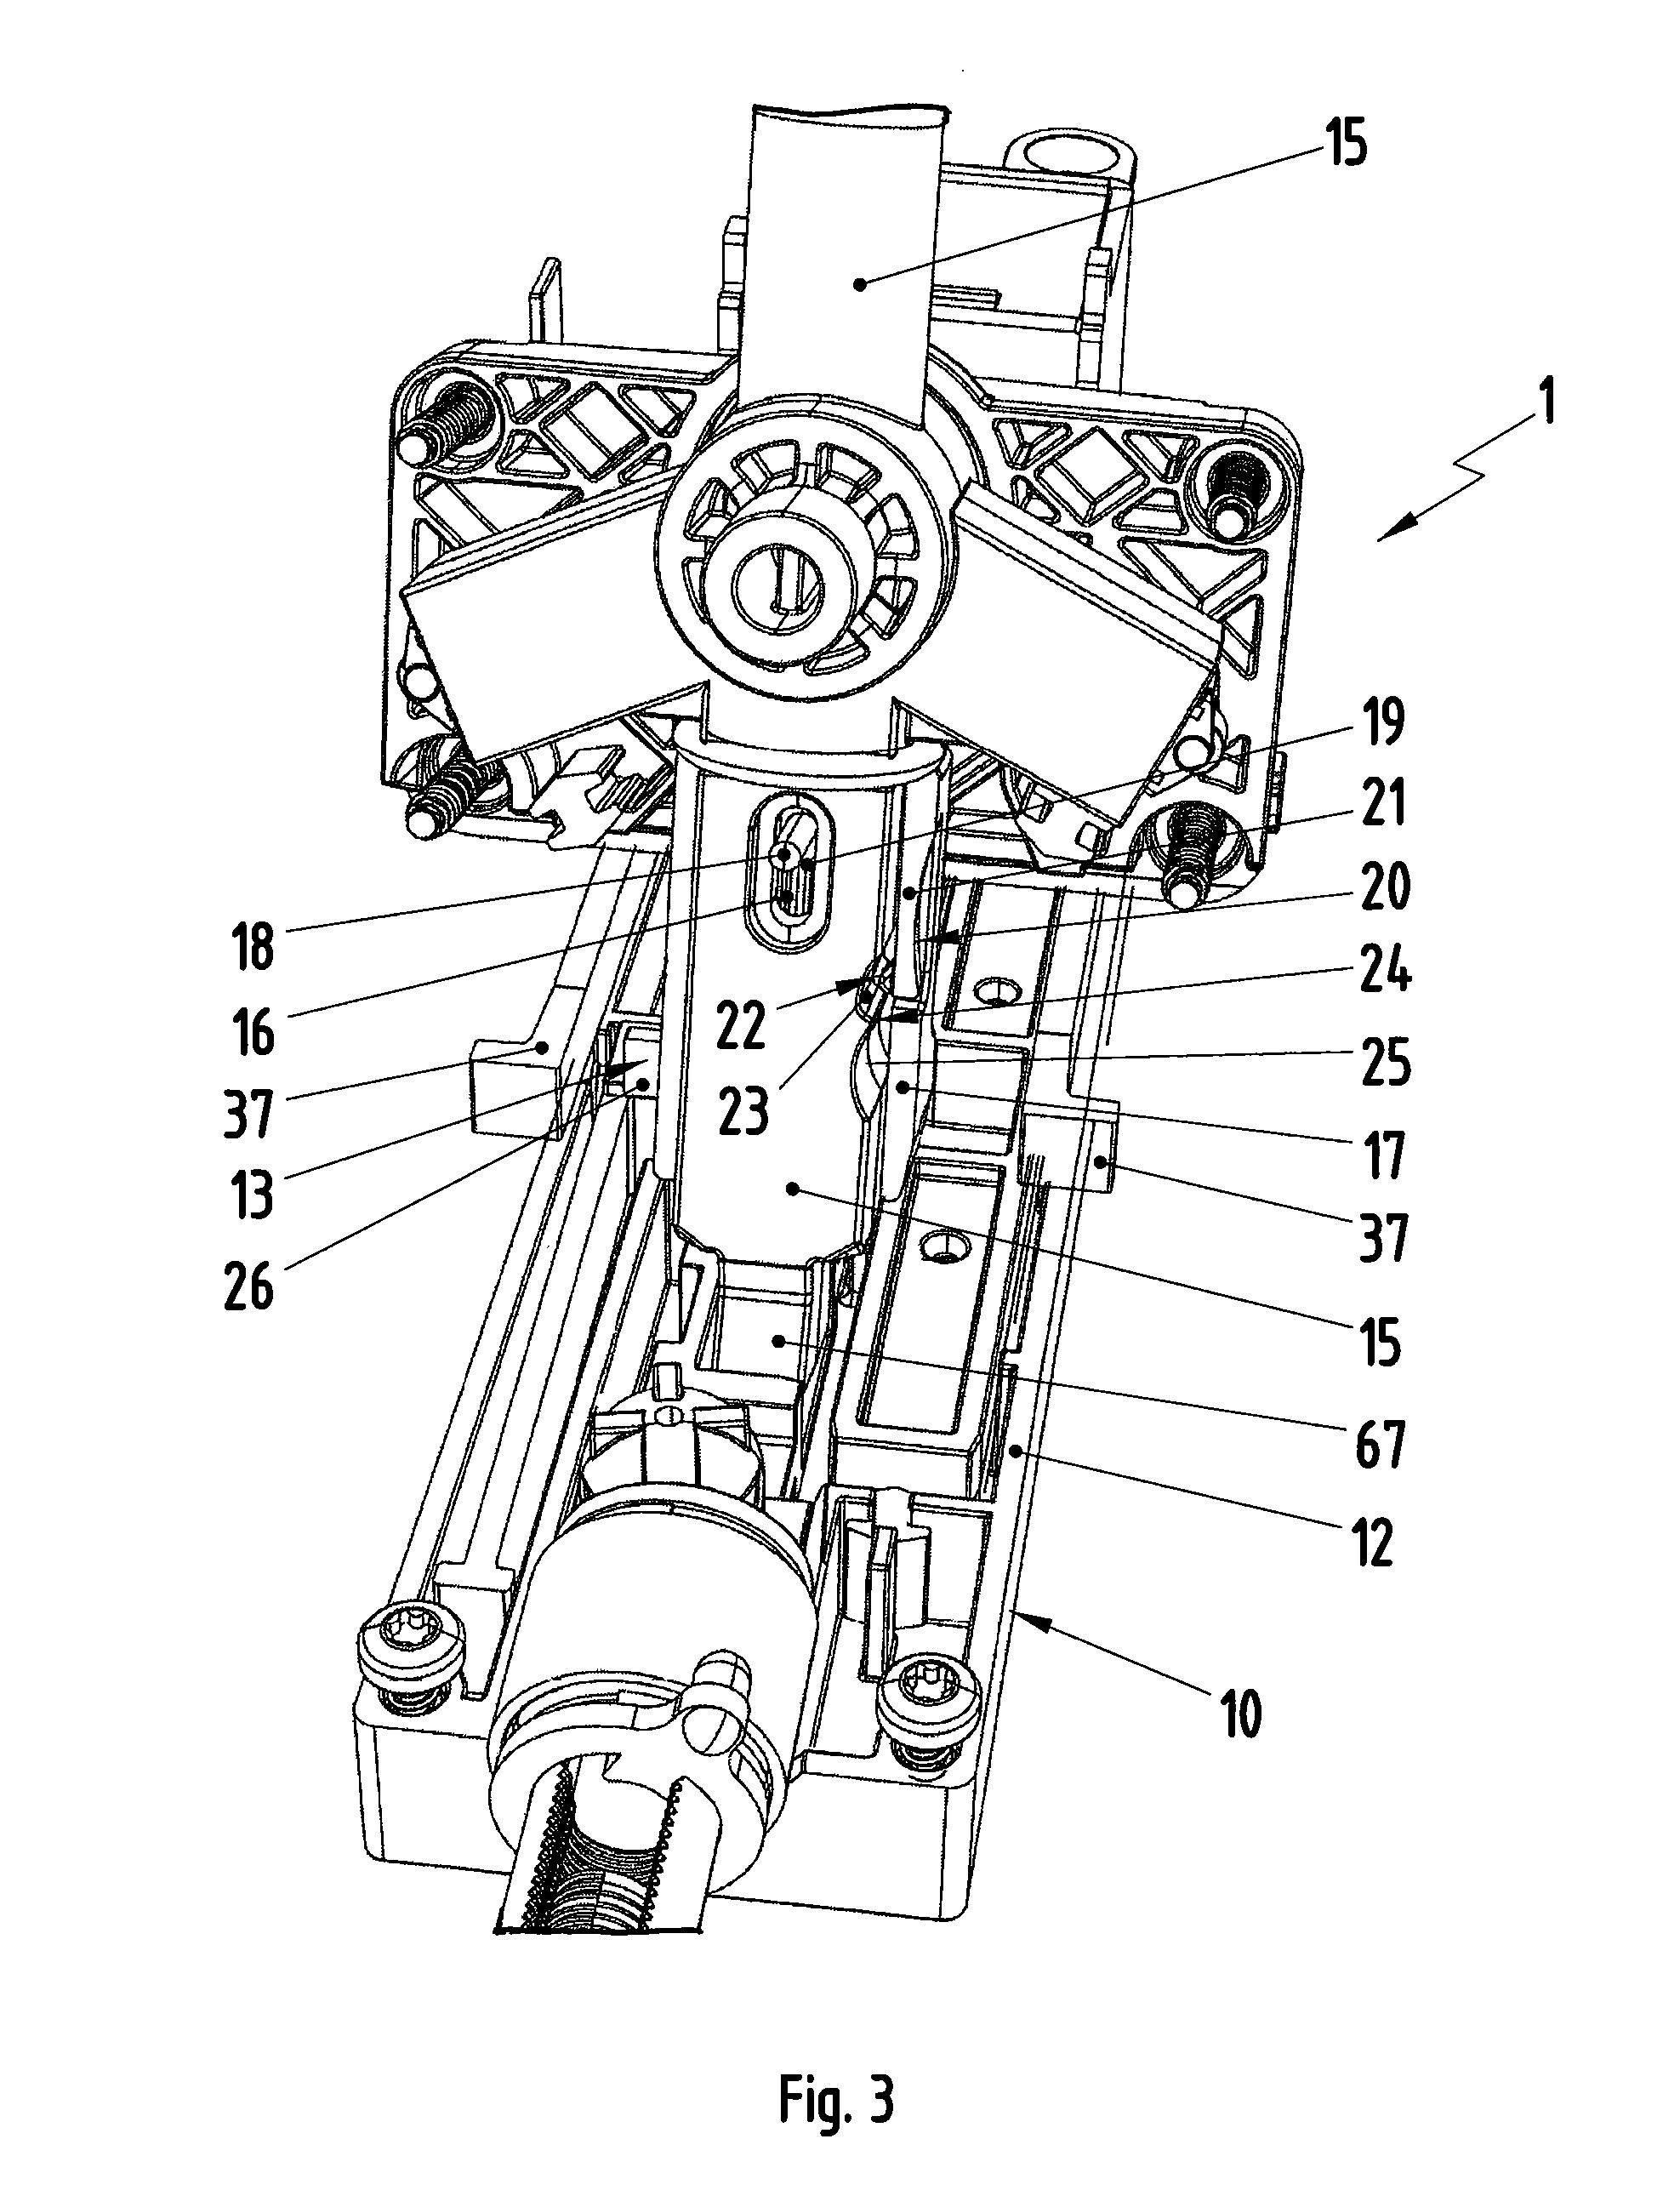 Shifting device for an automatic transmission